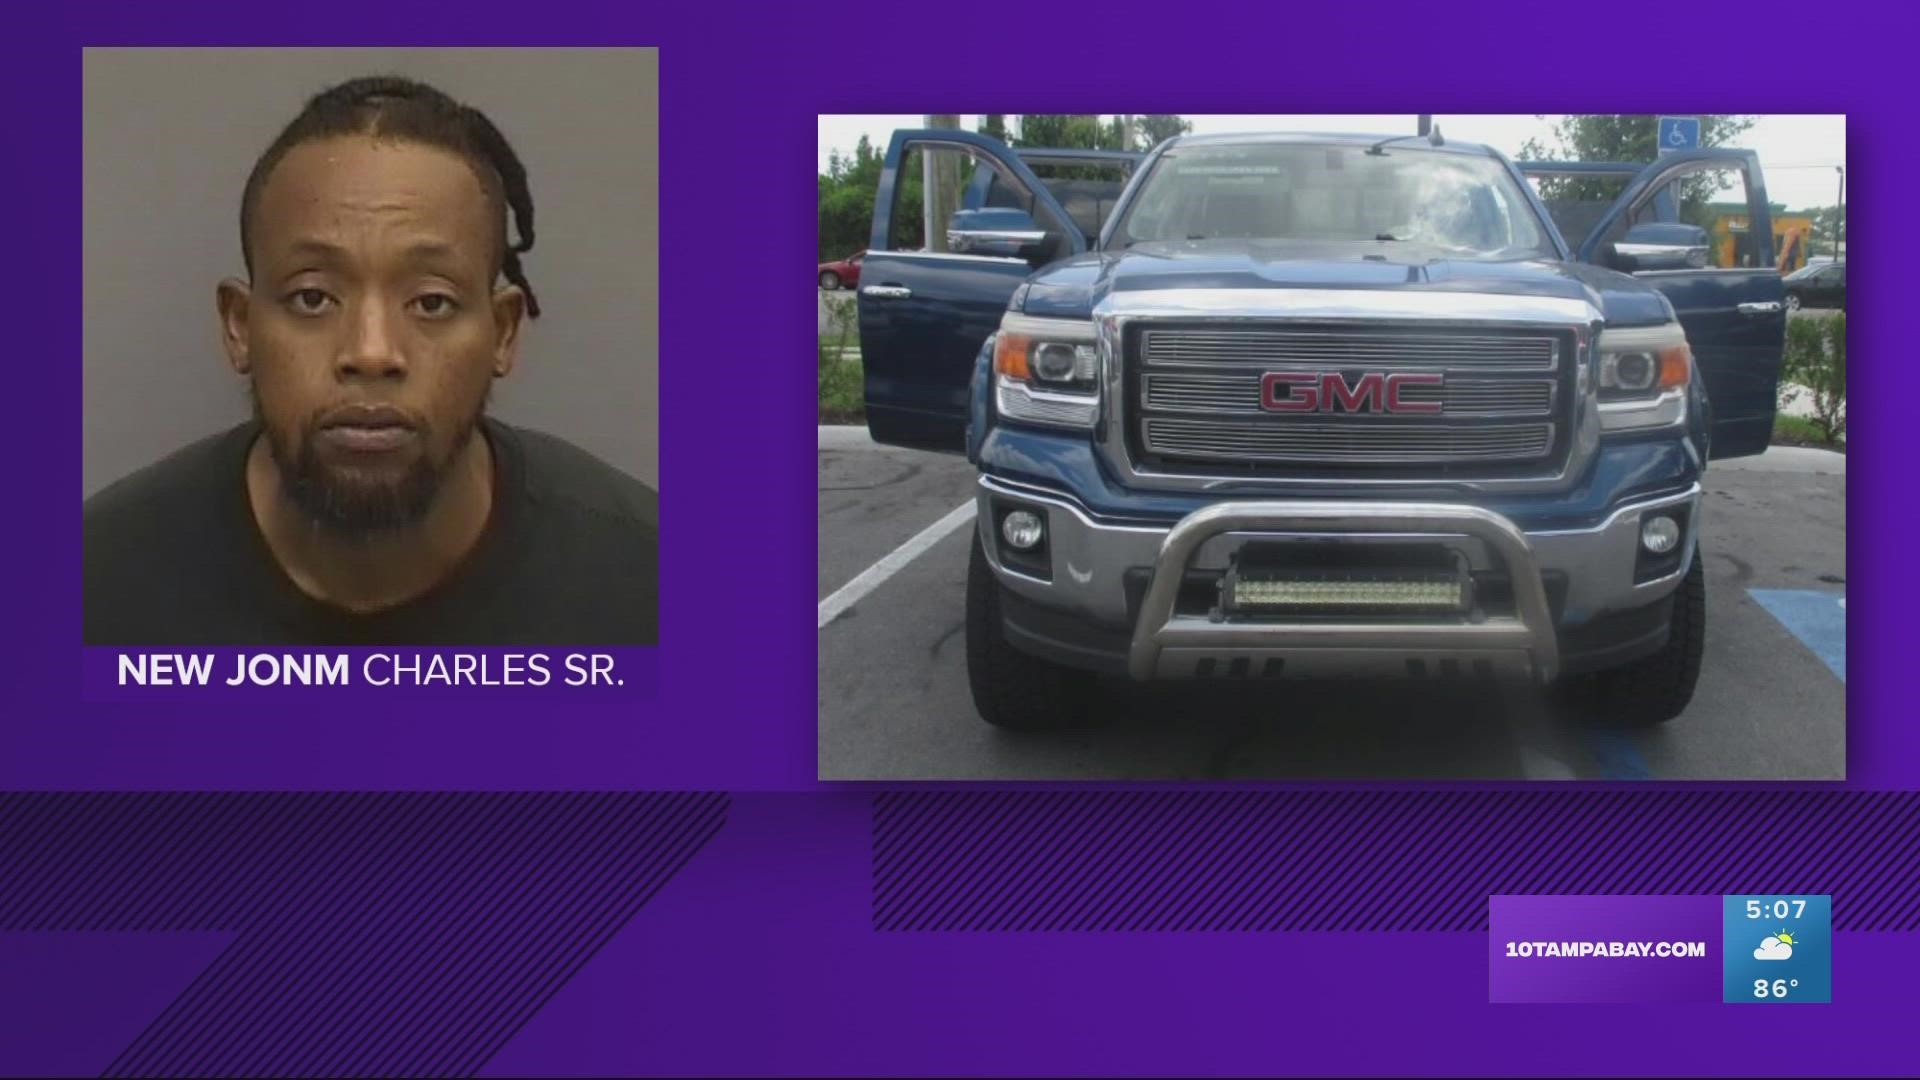 In his pick-up truck, authorities say they found false badges and identification cards.